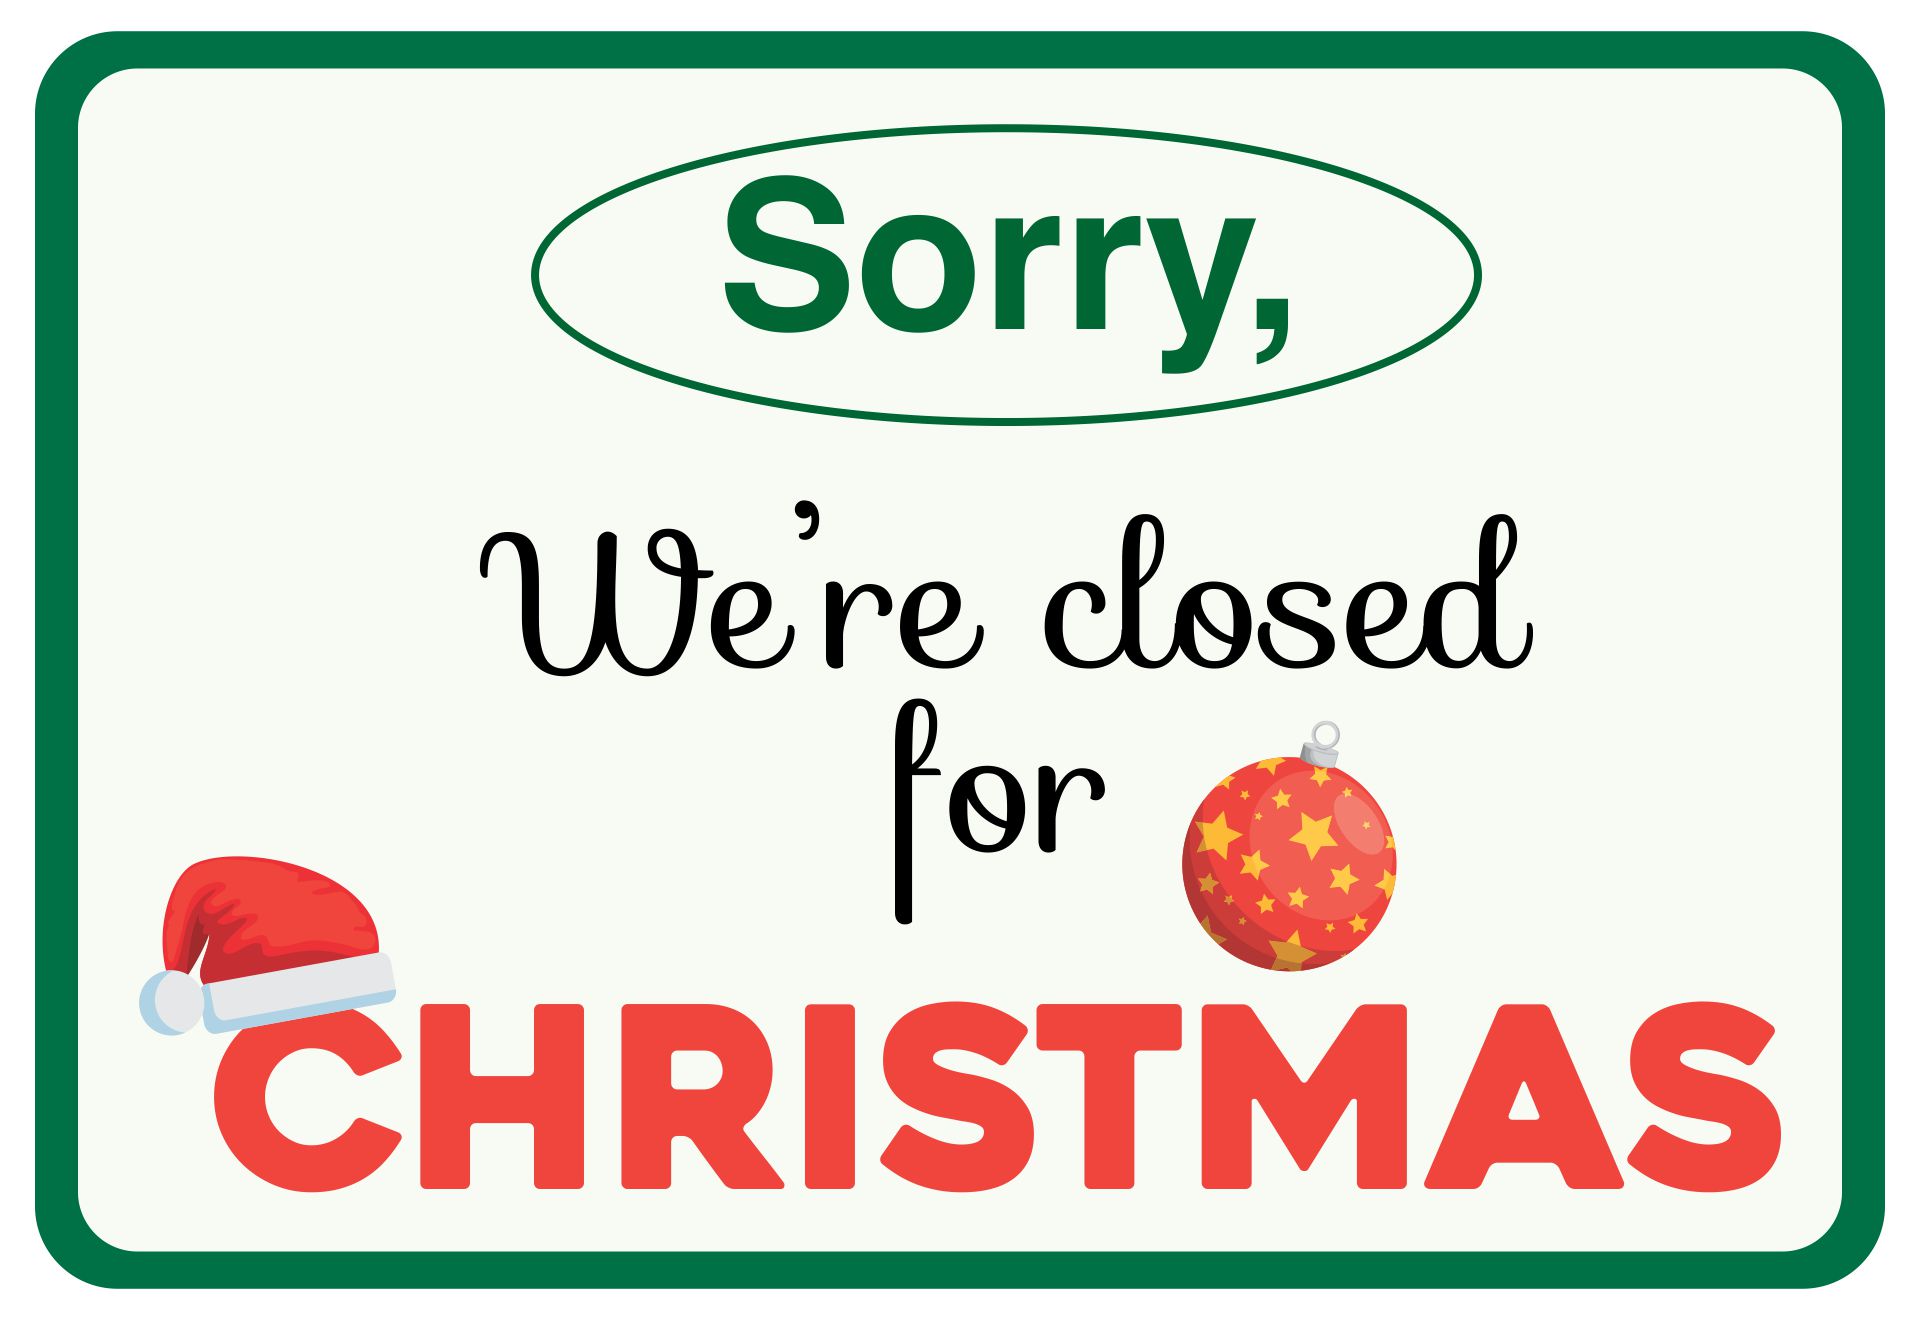 Printable Holiday Closed Signs